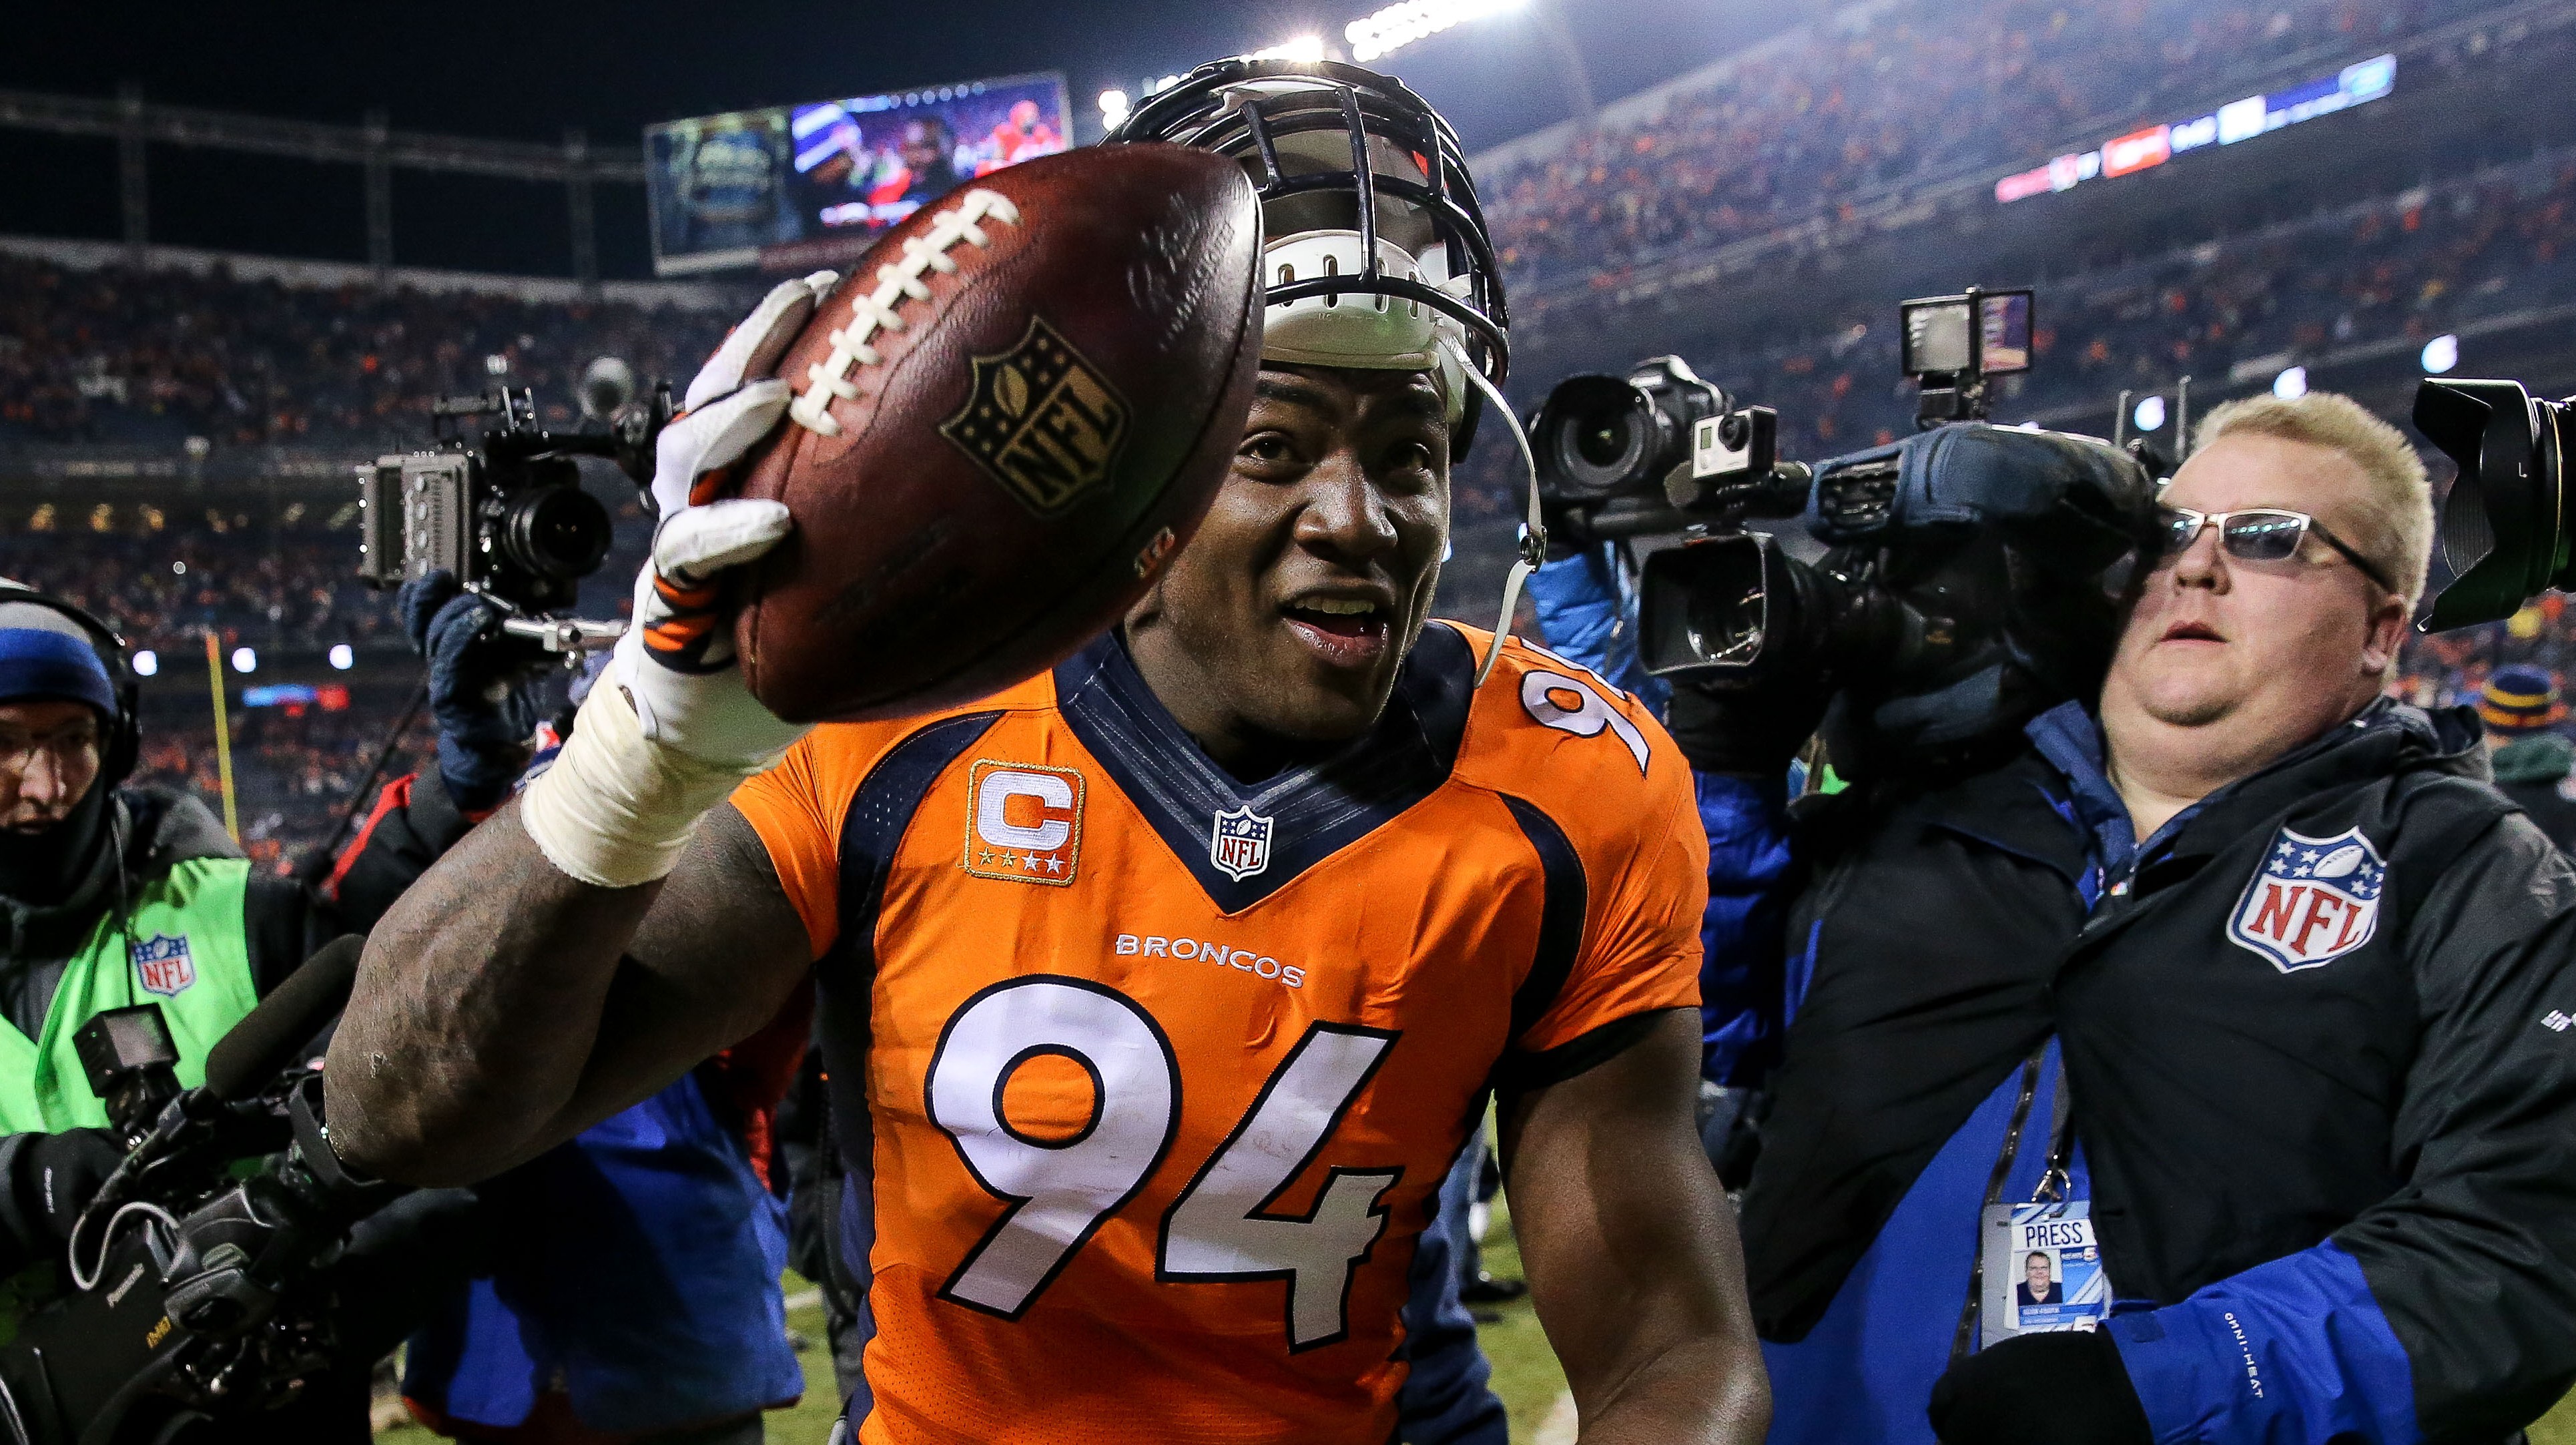 Broncos Playoff Picture Seeding & Potential Matchups